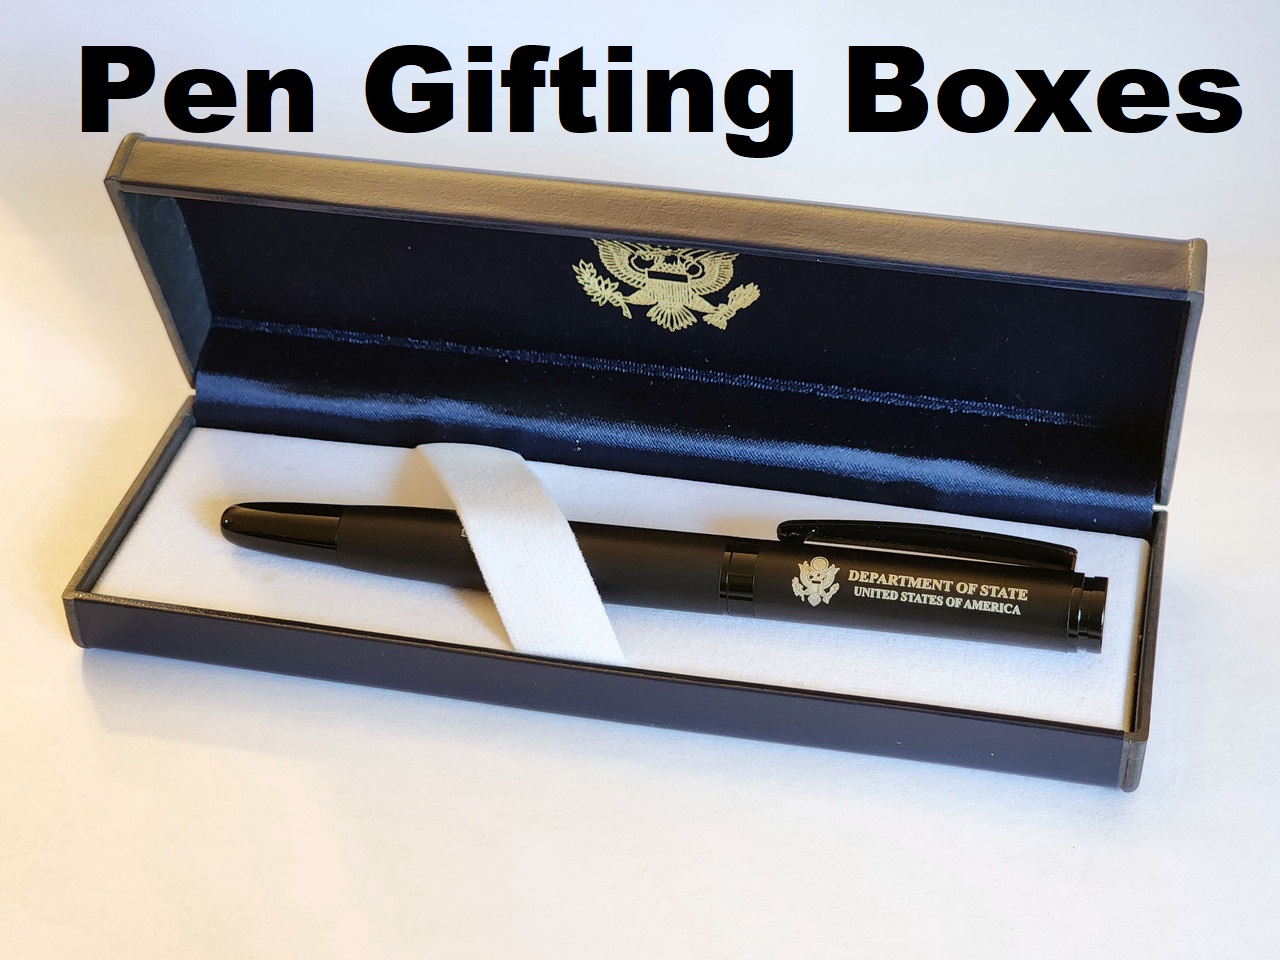 Pen Gifting Boxes